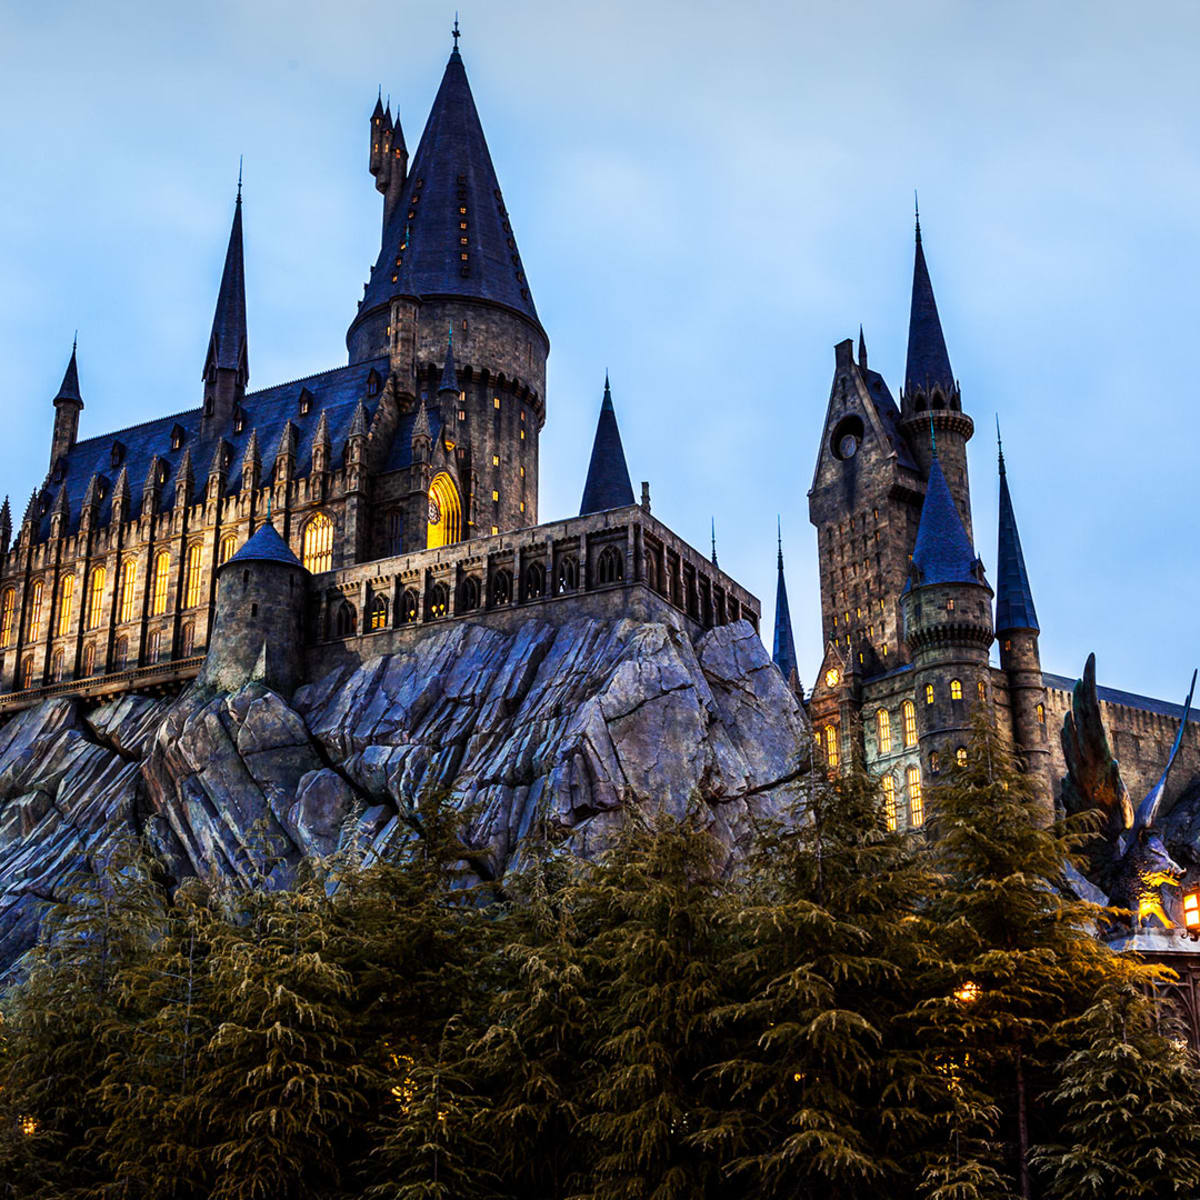 Harry Potter fans can now explore the halls of Hogwarts Castle in Pottermore  - Polygon